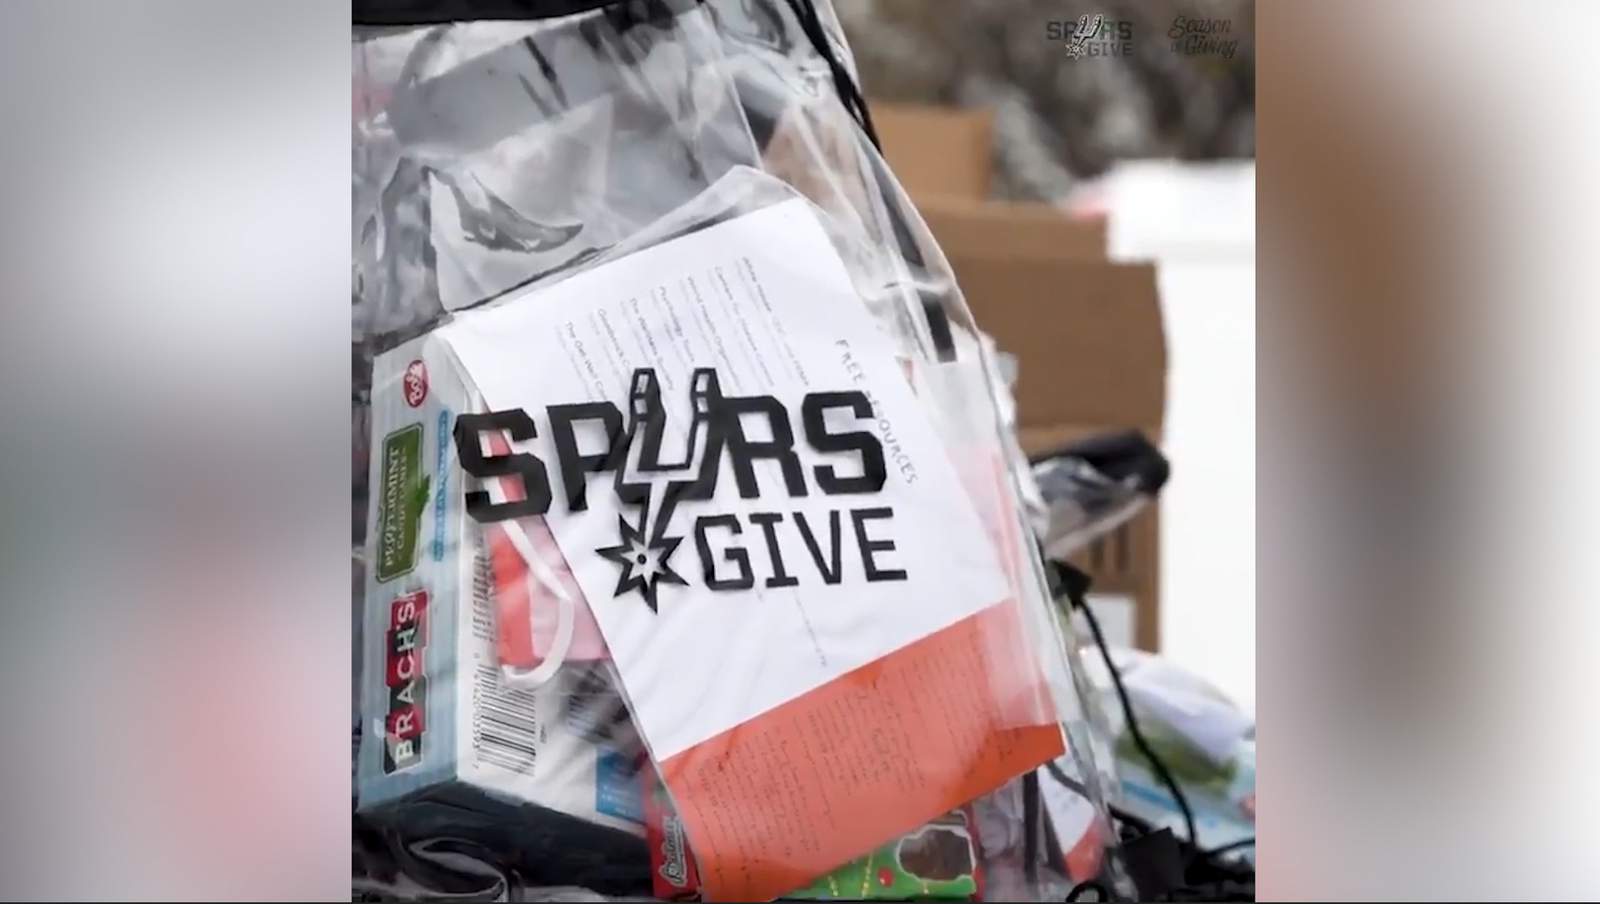 Spurs Give working hard to give back to community, has big plans ahead